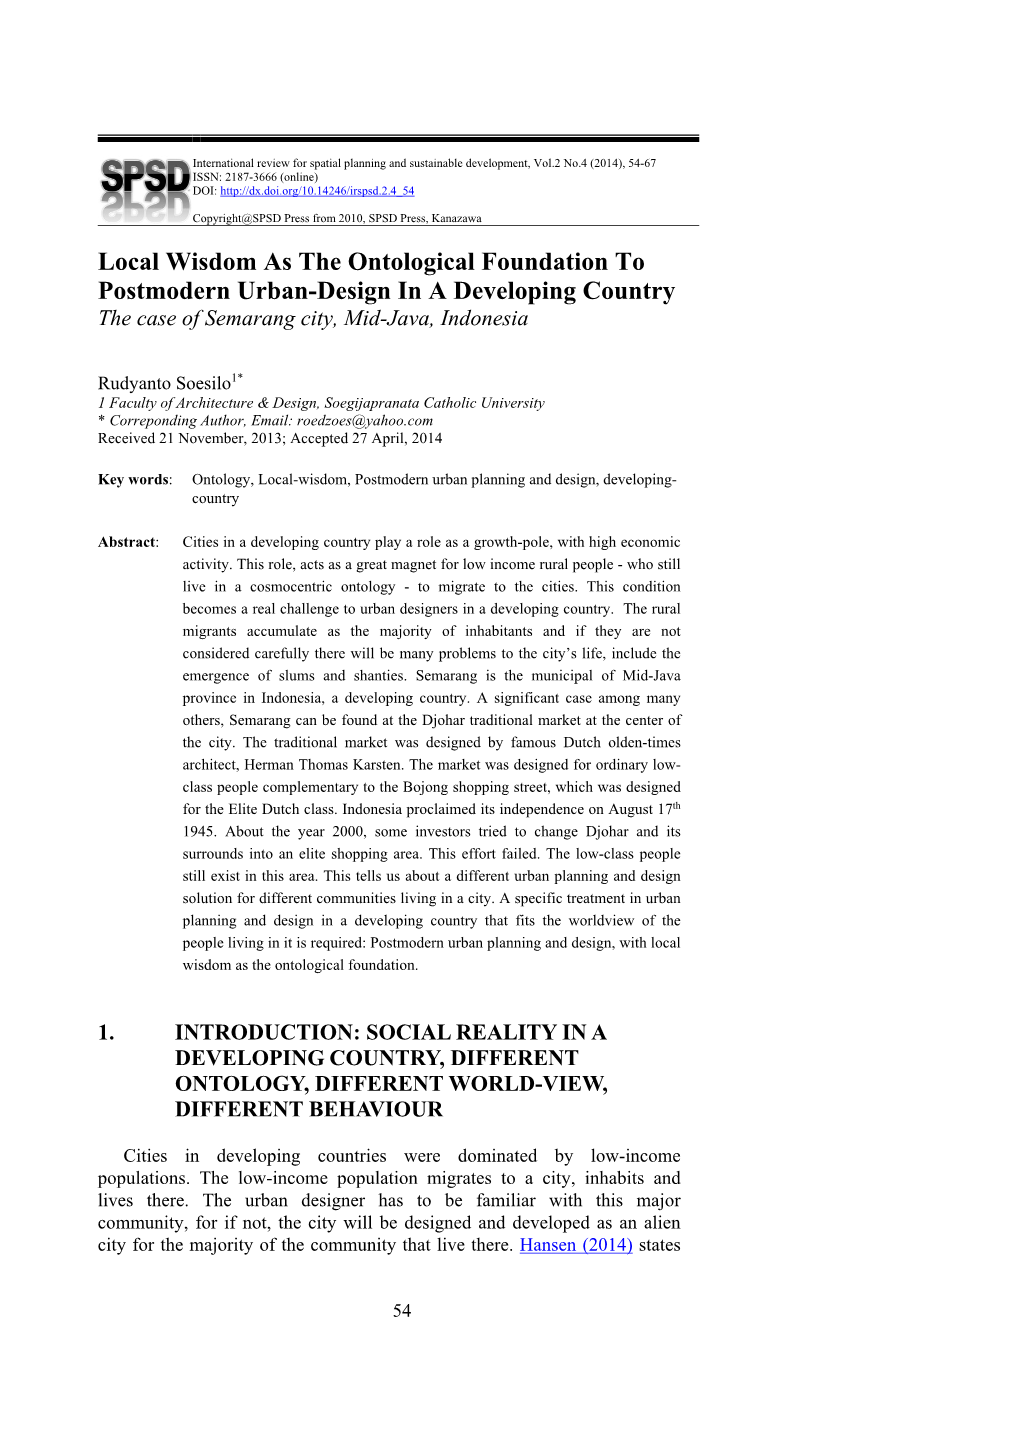 Local Wisdom As the Ontological Foundation to Postmodern Urban-Design in a Developing Country the Case of Semarang City, Mid-Java, Indonesia